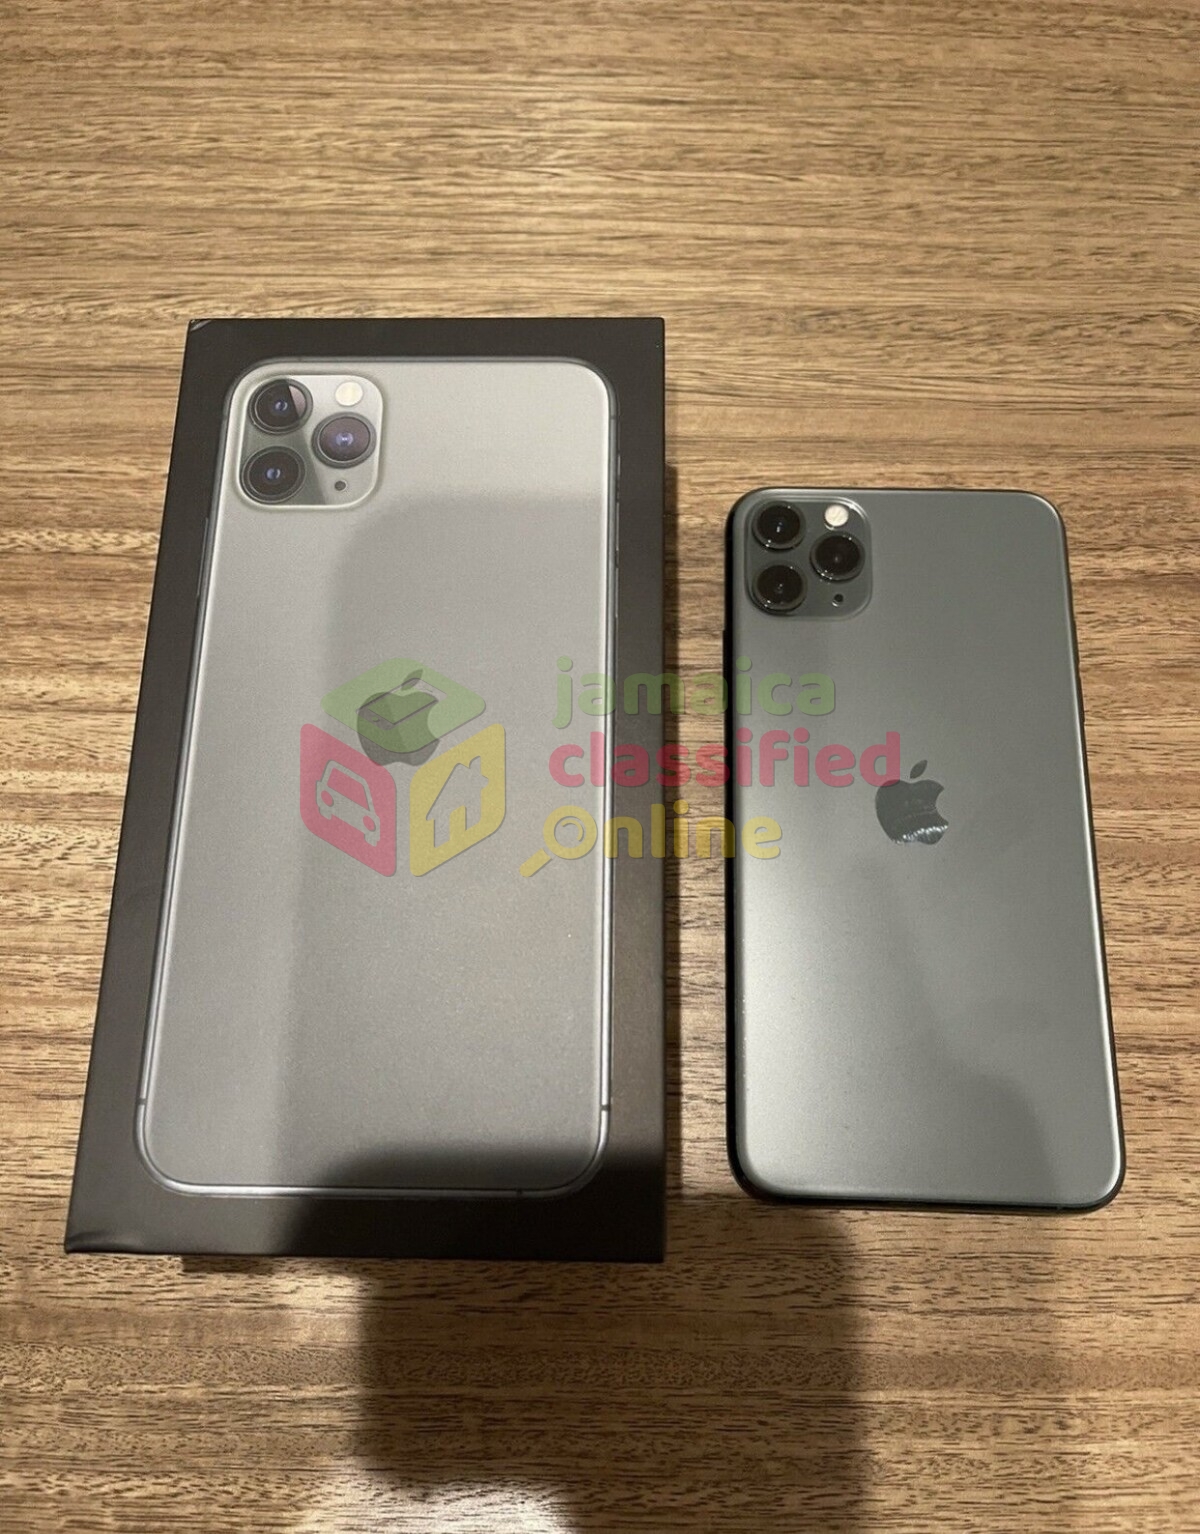 Apple Iphone 11 Pro Max 256gb Midnight Green For Sale In Shop 23 Central Plaza Kingston 10 Kingston St Andrew Phones